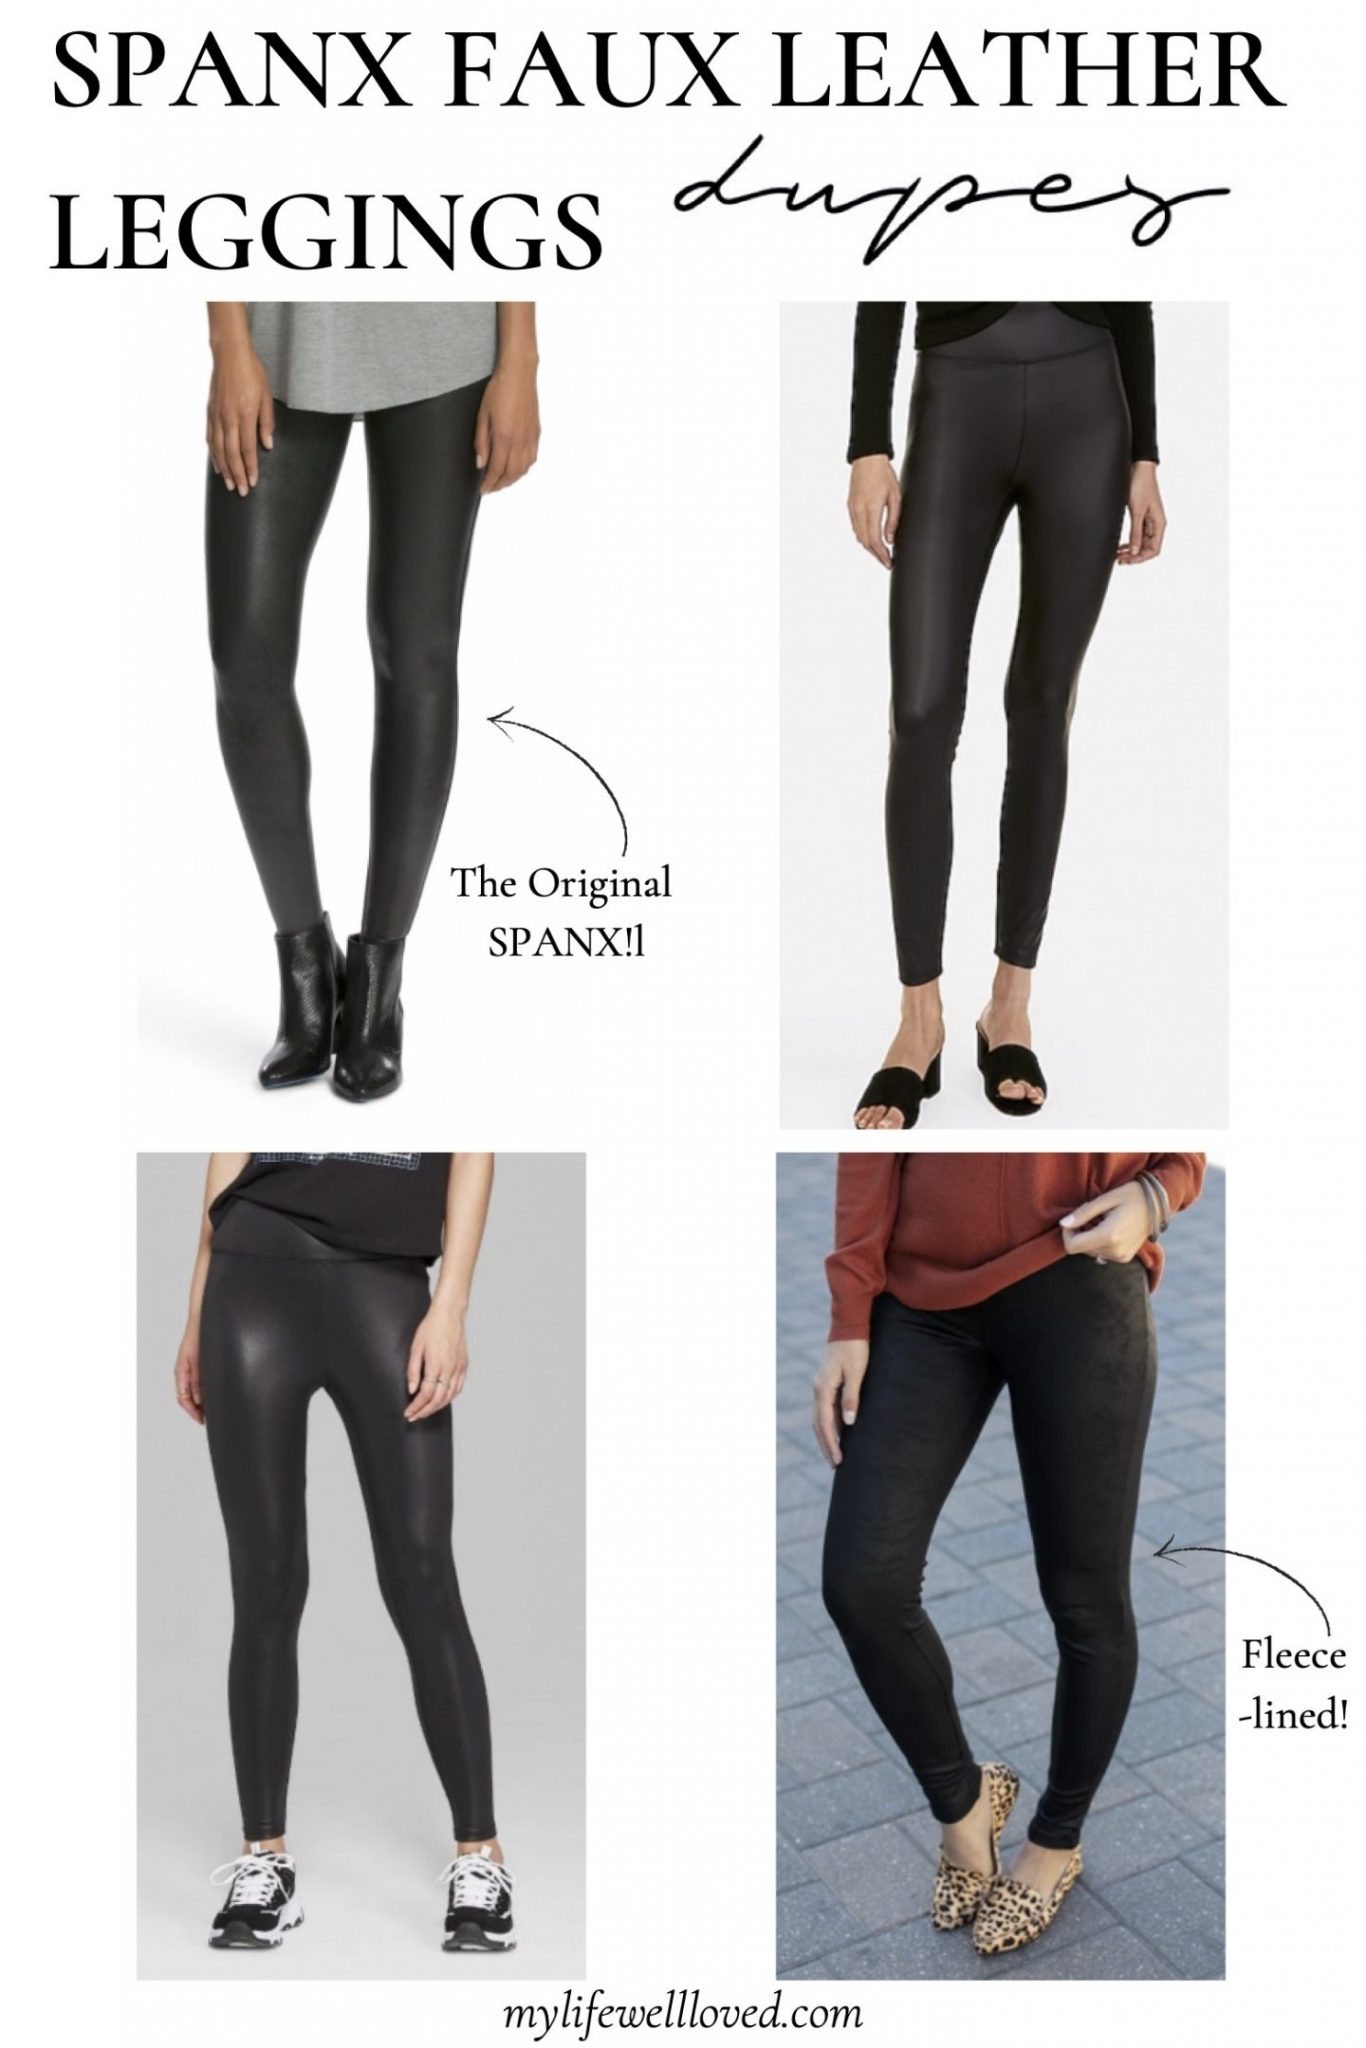 https://www.mylifewellloved.com/wp-content/uploads/spanx-faux-leather-leggings-1440x2159-1-scaled.jpg